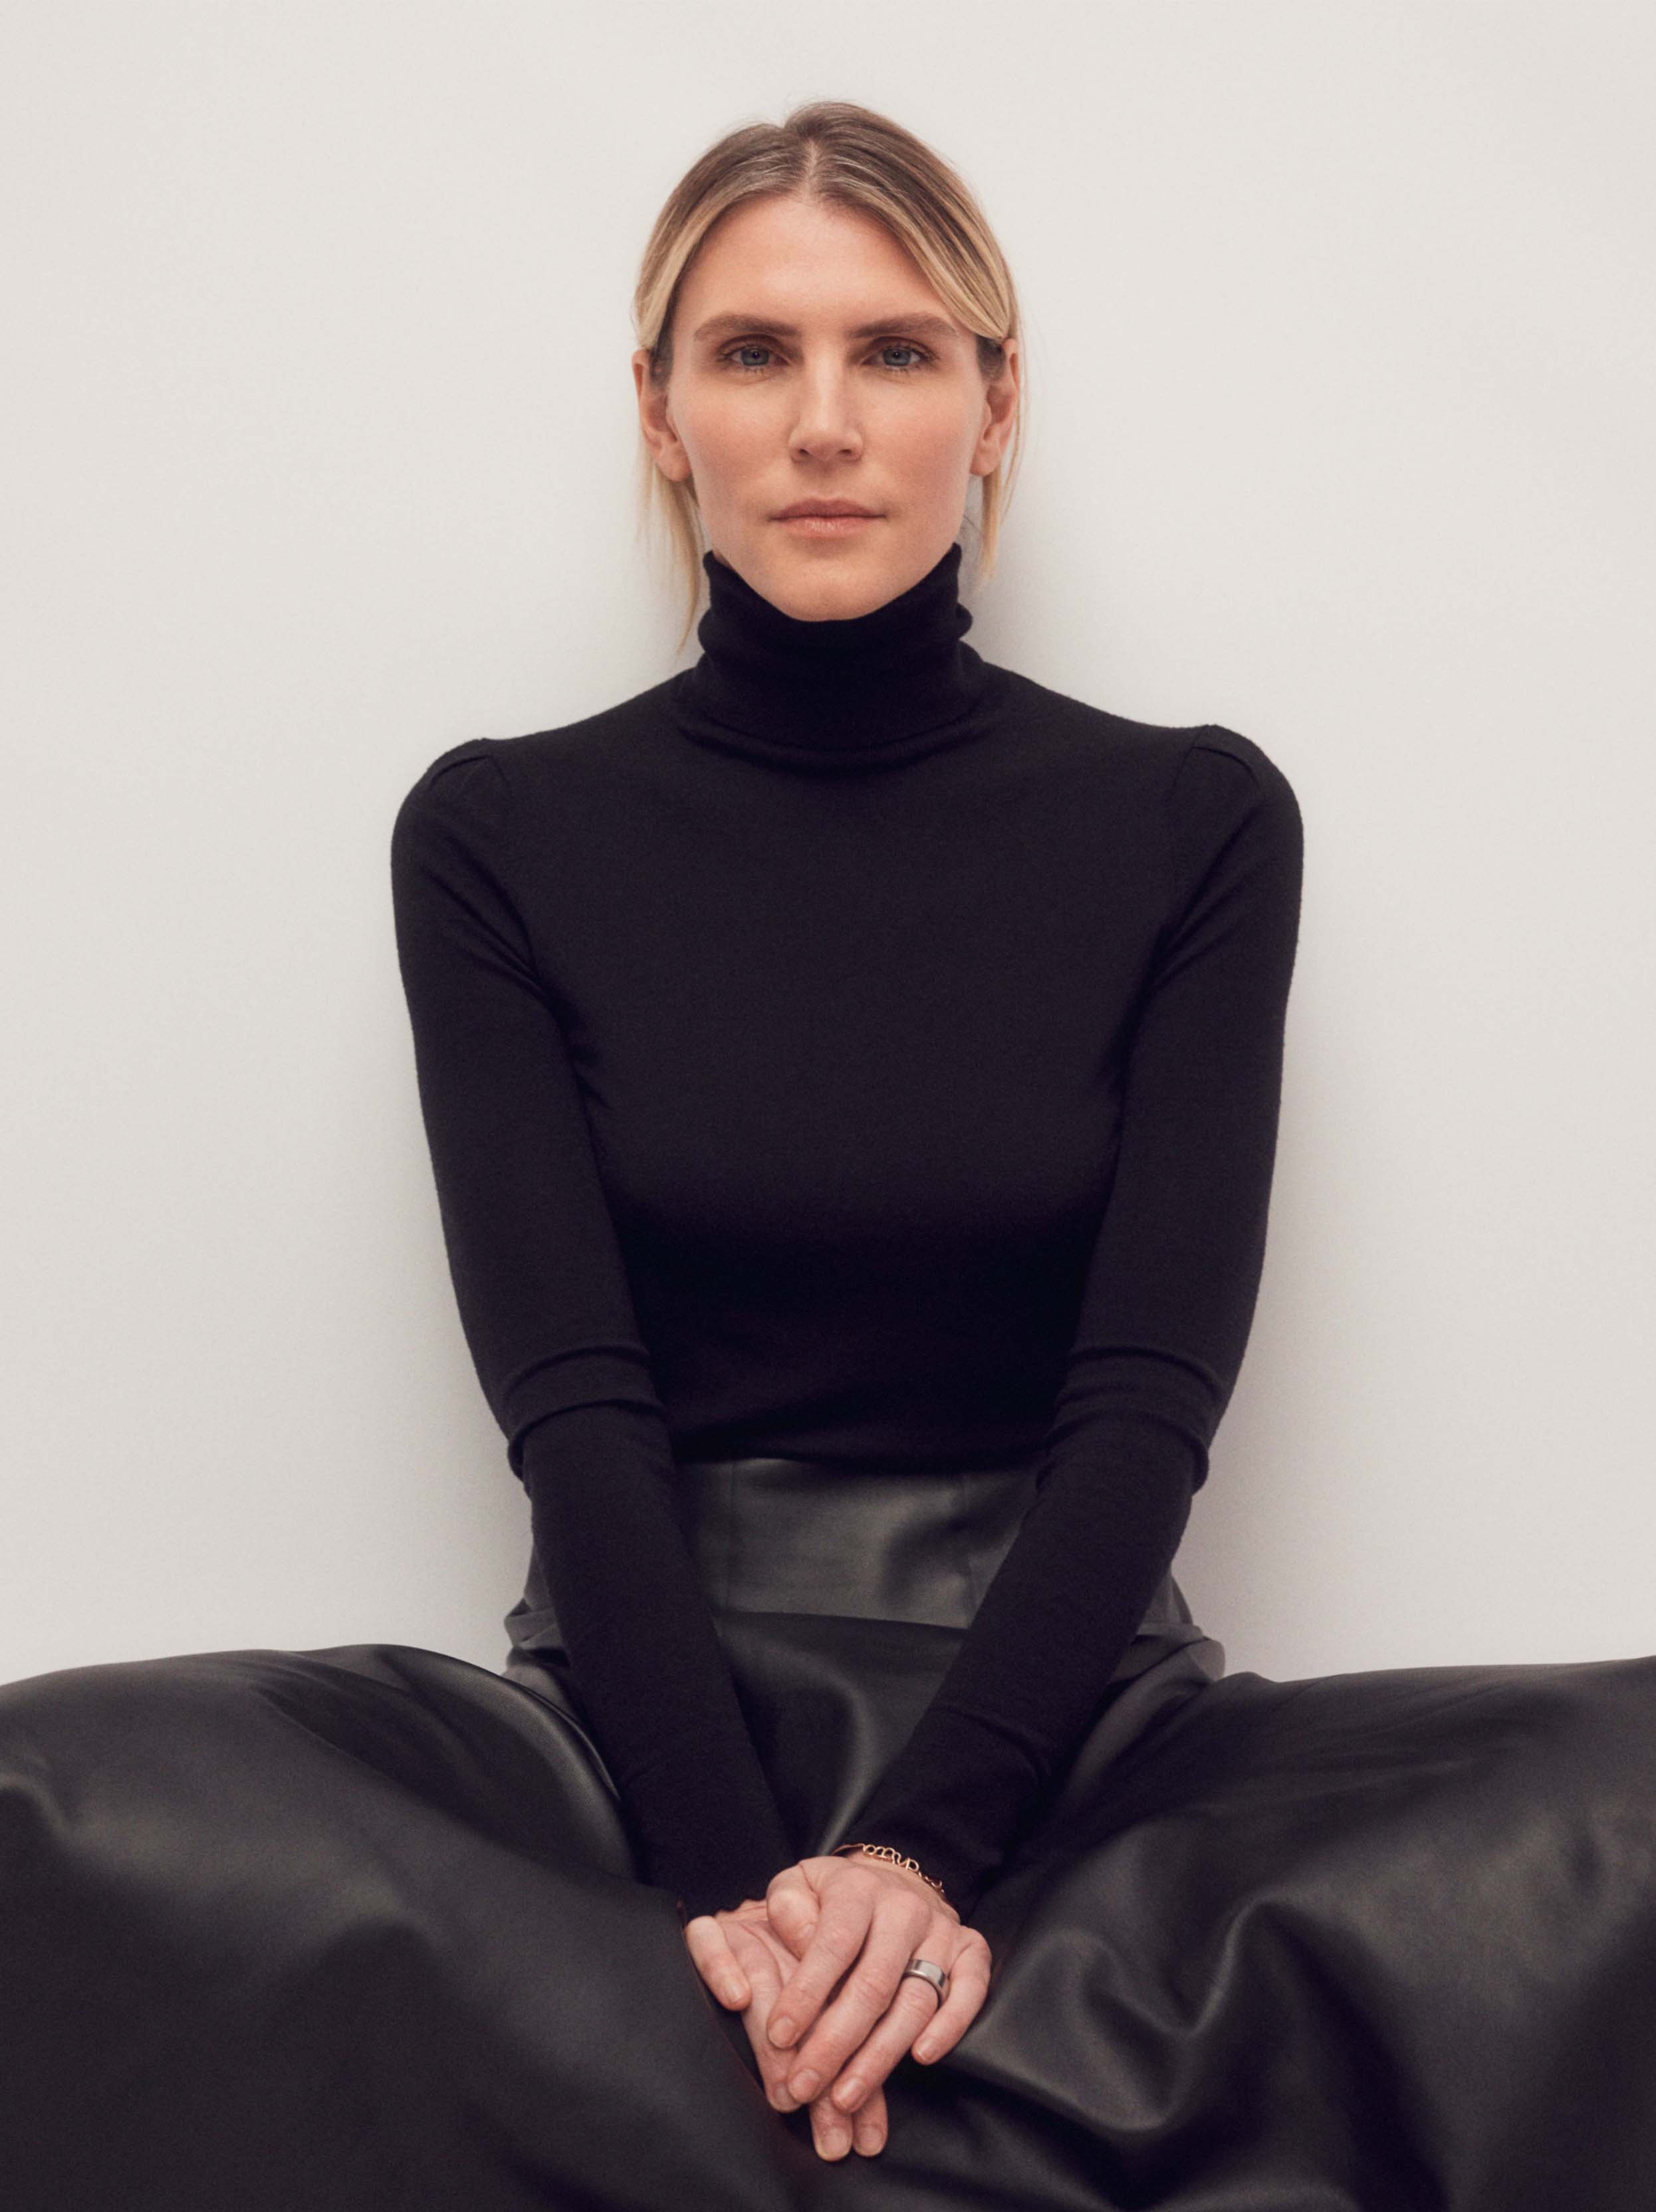 The FT’s 25 Most Influential Women of 2021 – Gabriela Hearst